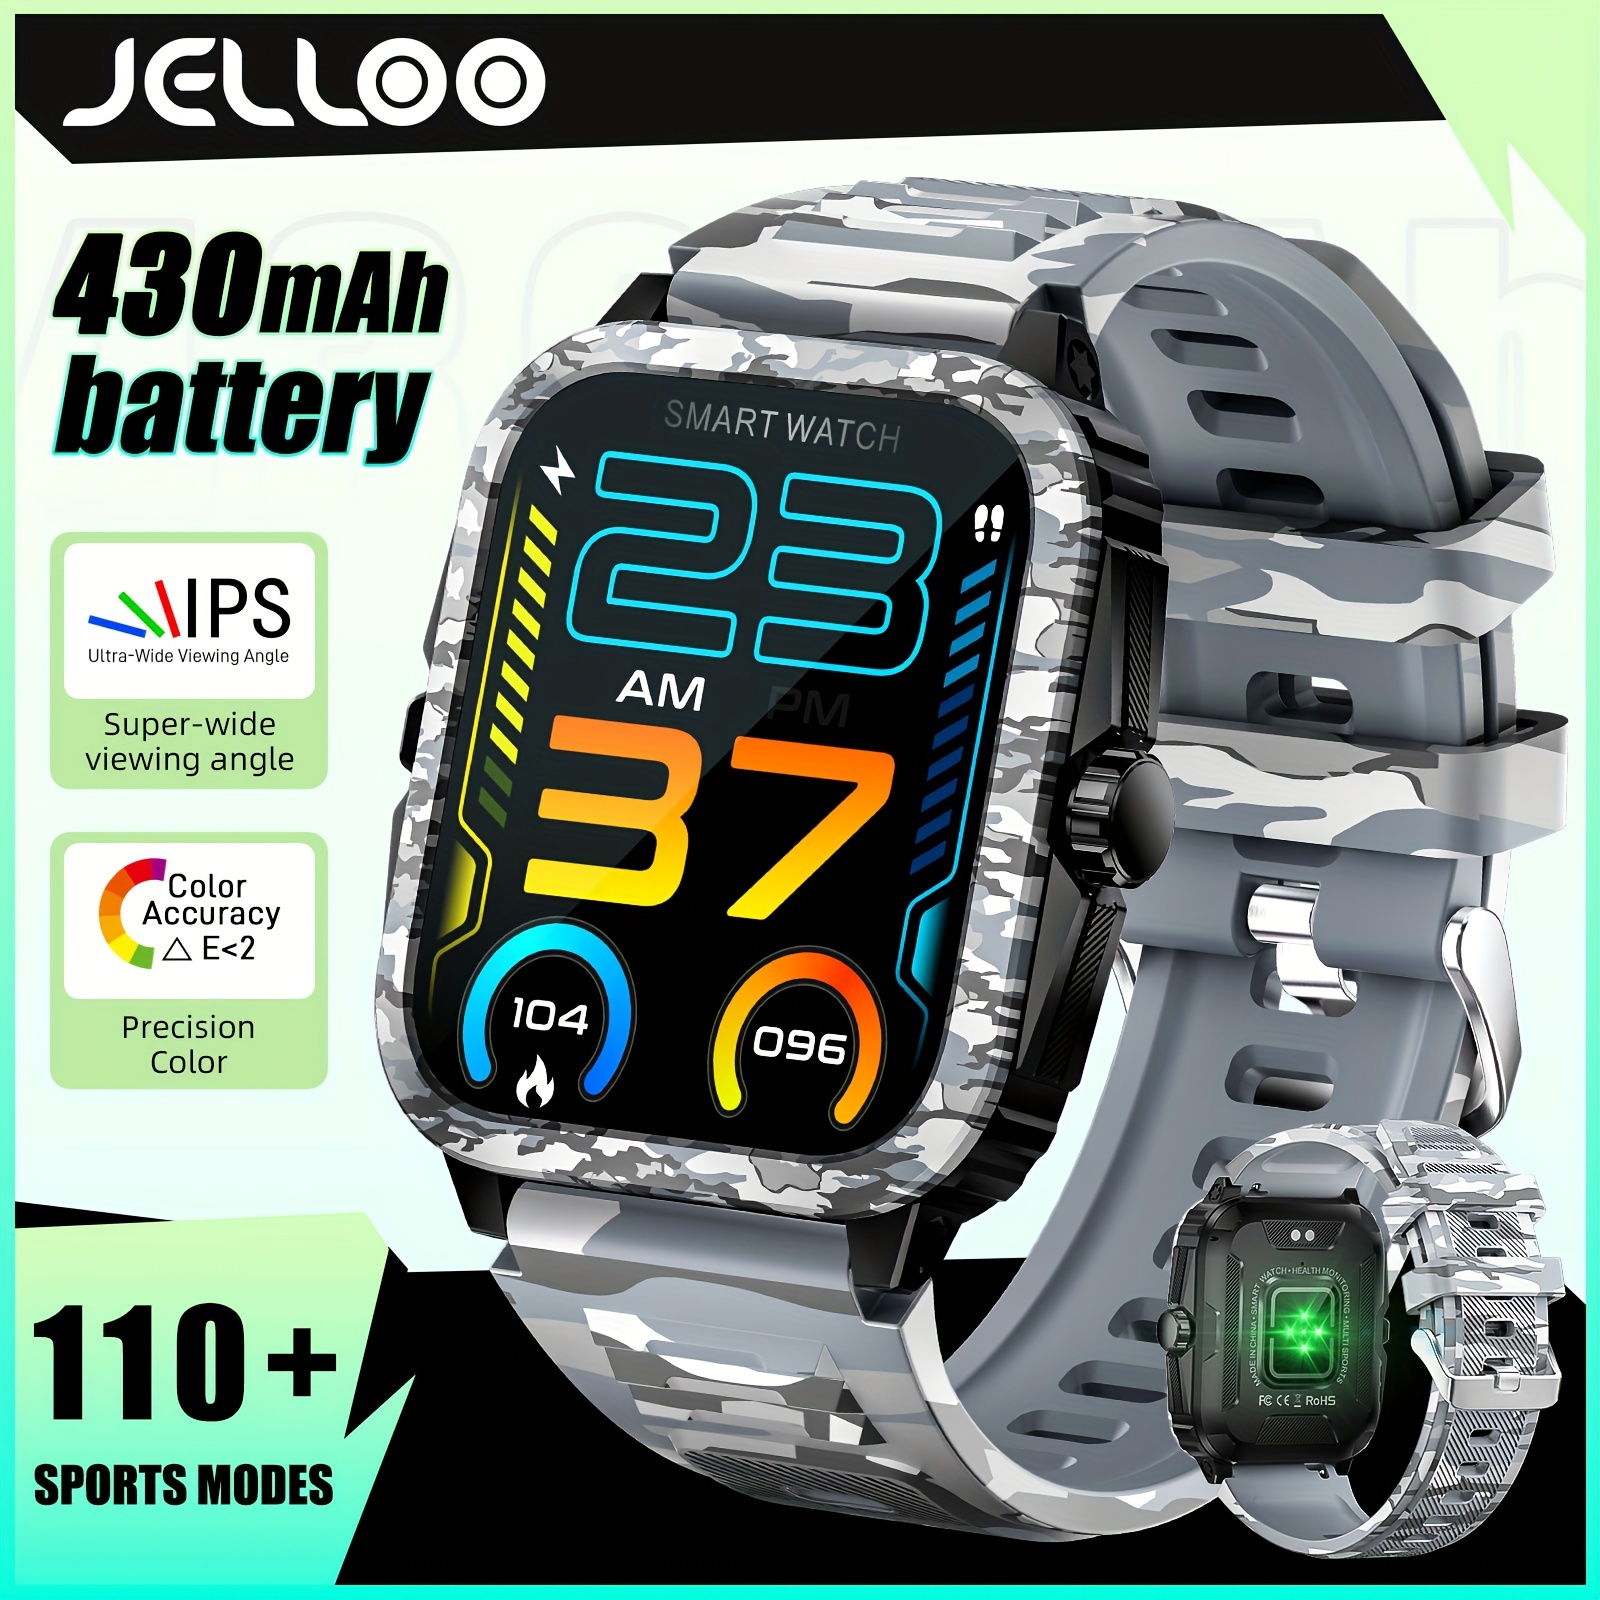 

Jelloo Smart Watch With Exercise Recording, Voice Assistant, Weather, 1.96'' Smartwatch With Wireless Call(answer,make,reject Calls),sport Fitness With Multi-sports Mode, For Iphone Android Phone